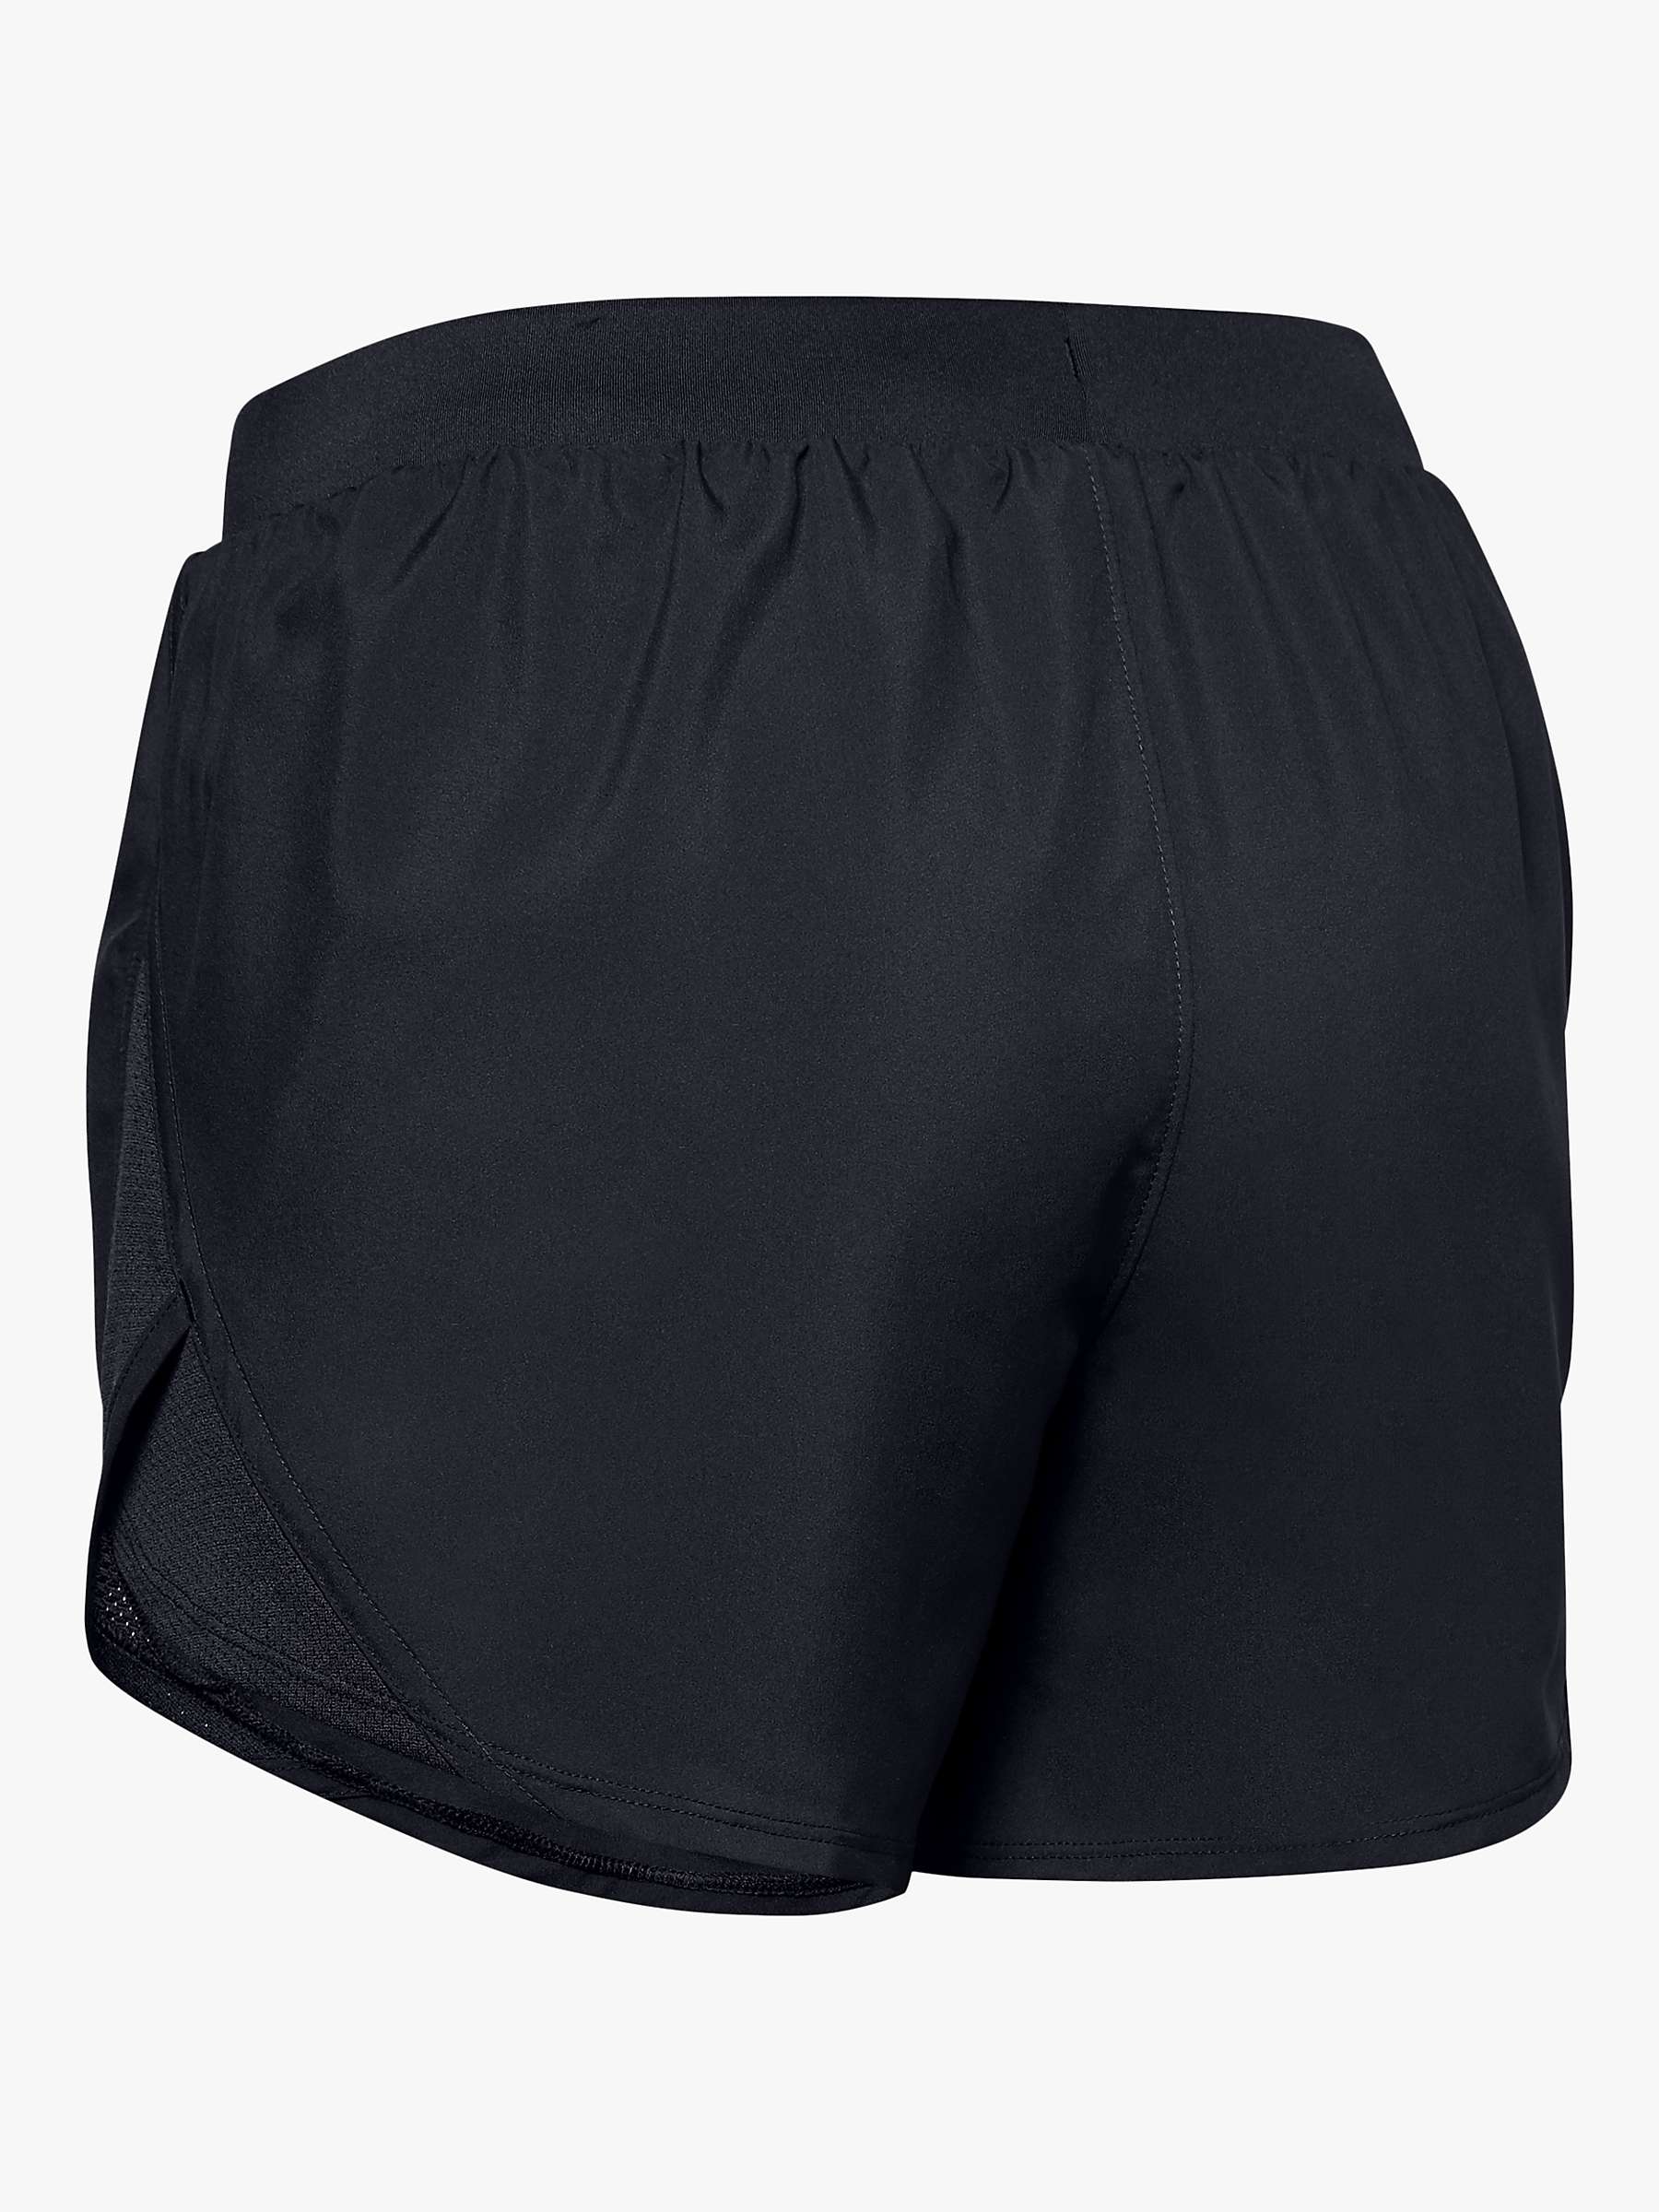 Under Armour Fly-By 2.0 Running Shorts, Black/Reflective at John Lewis ...